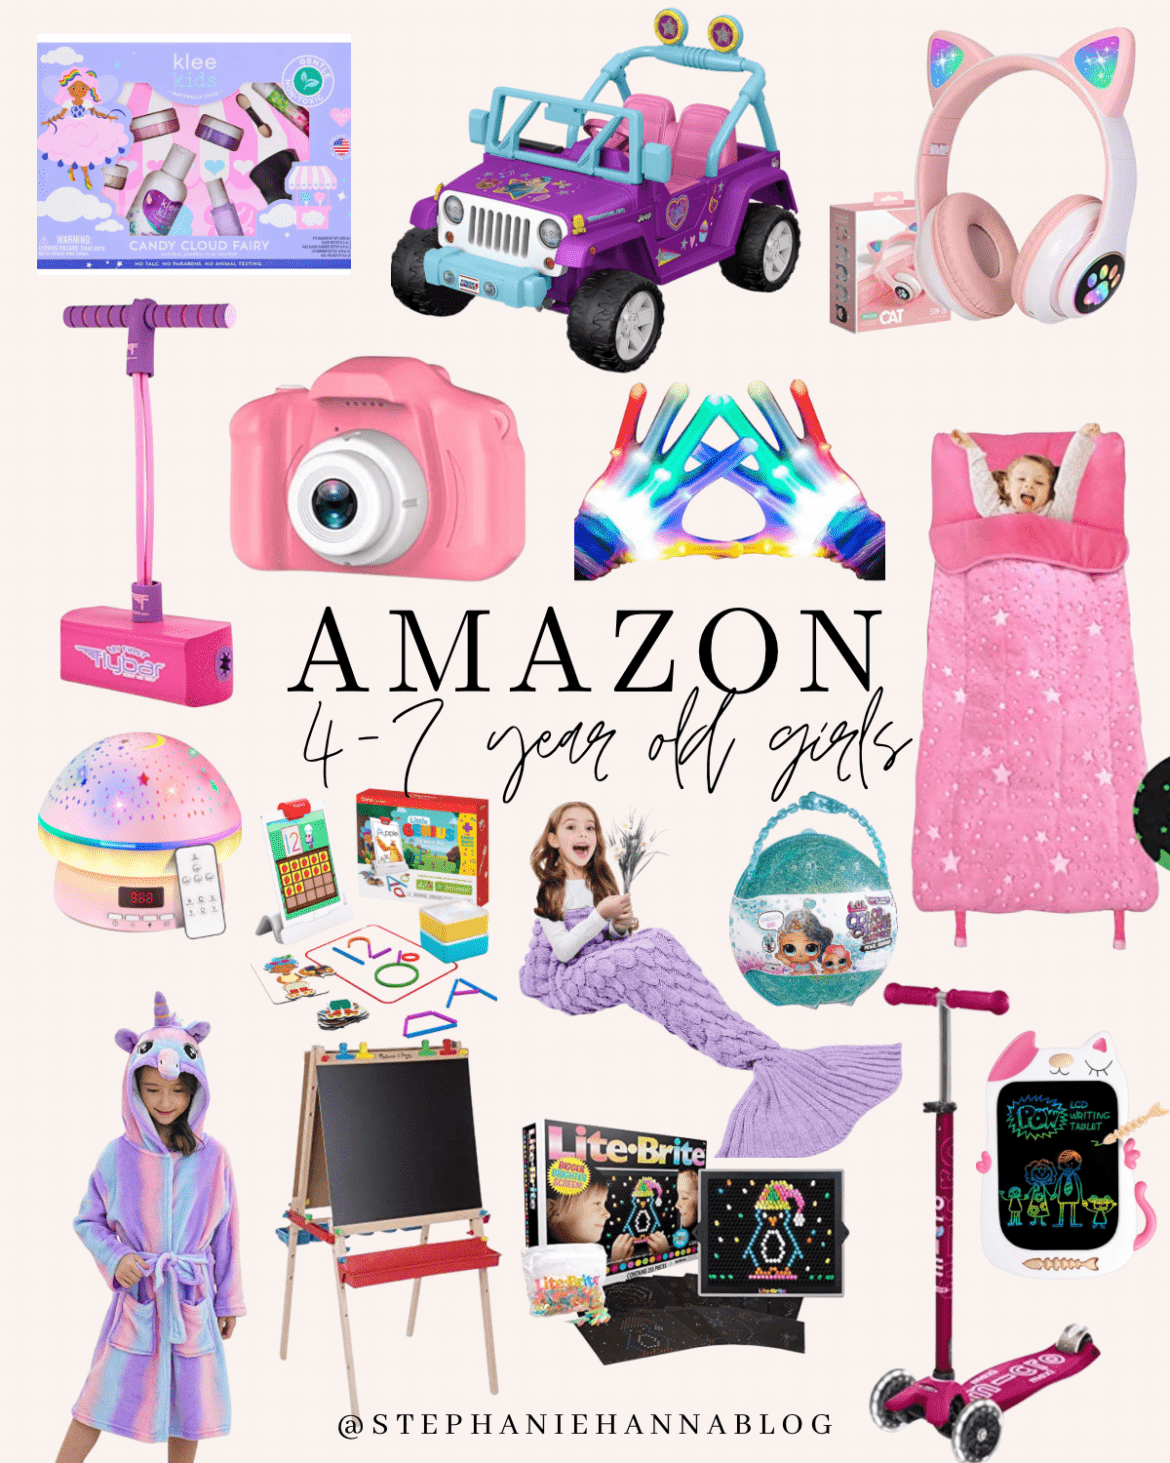 Amazon Gift Guide for Girls Ages 4-7 Years Old